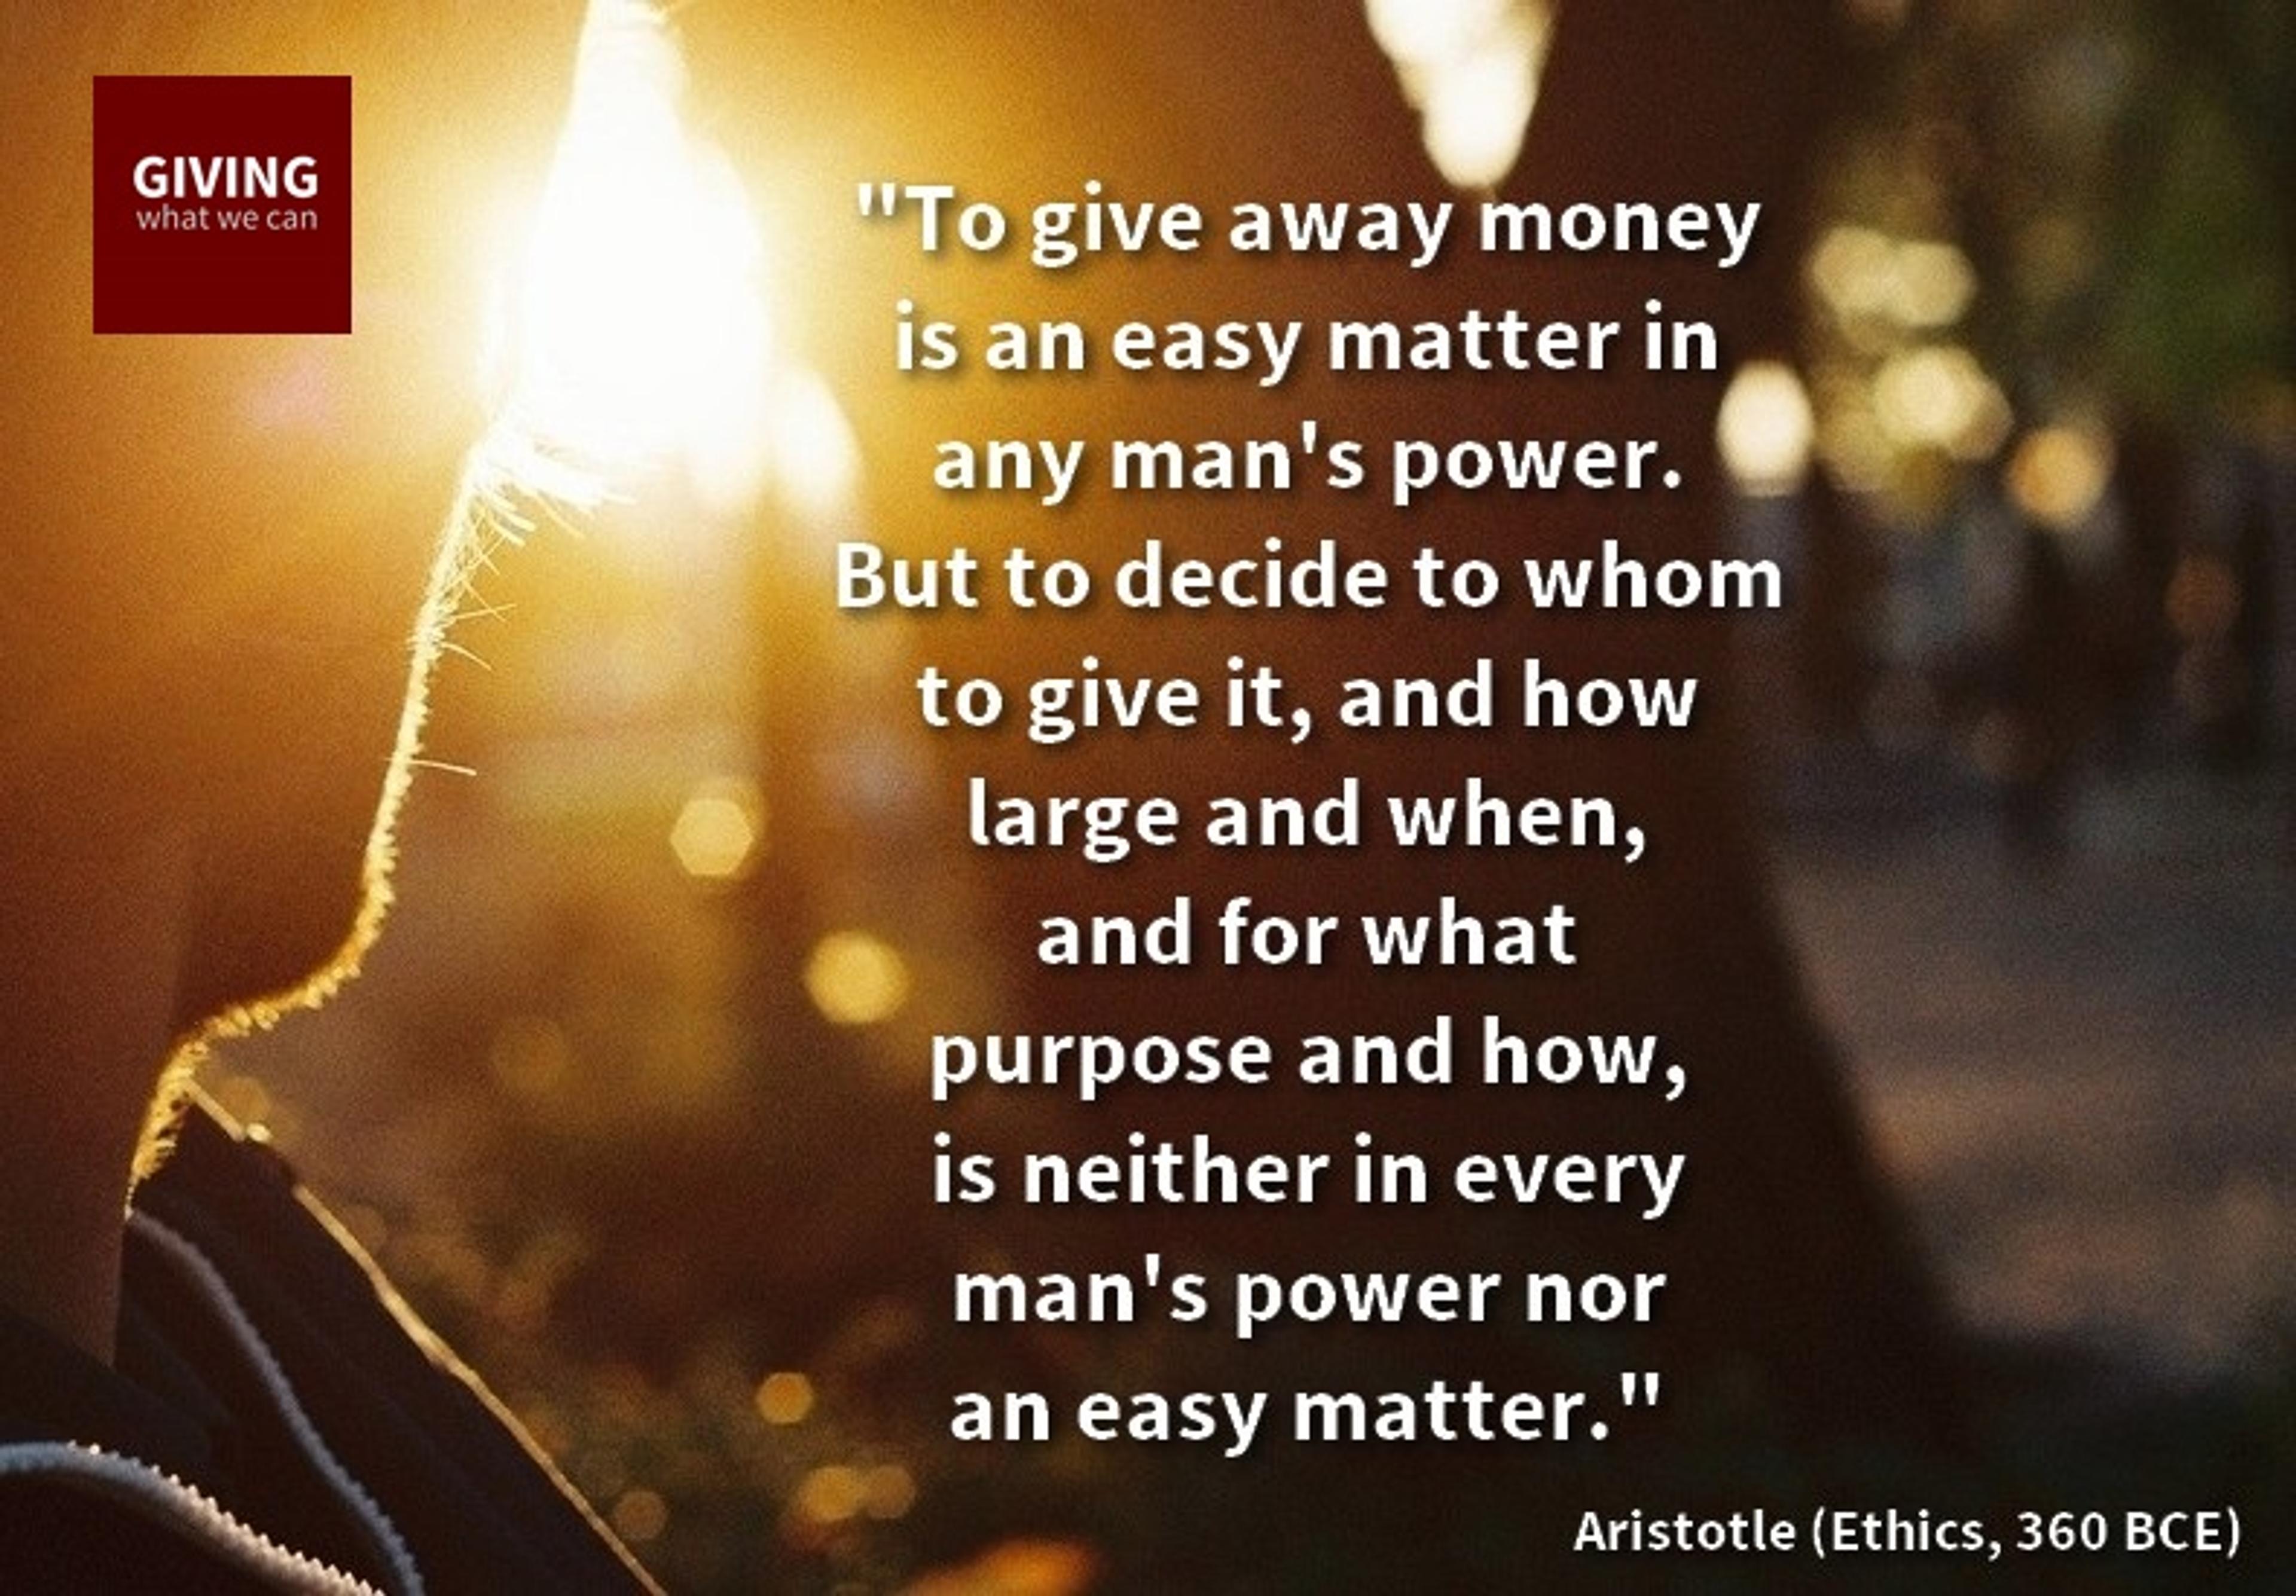 To give away money is an easy matter and in any man's power. But to decide to whom to give it, and how large and when, and for what purpose and how, is neither in every man's power nor an easy matter